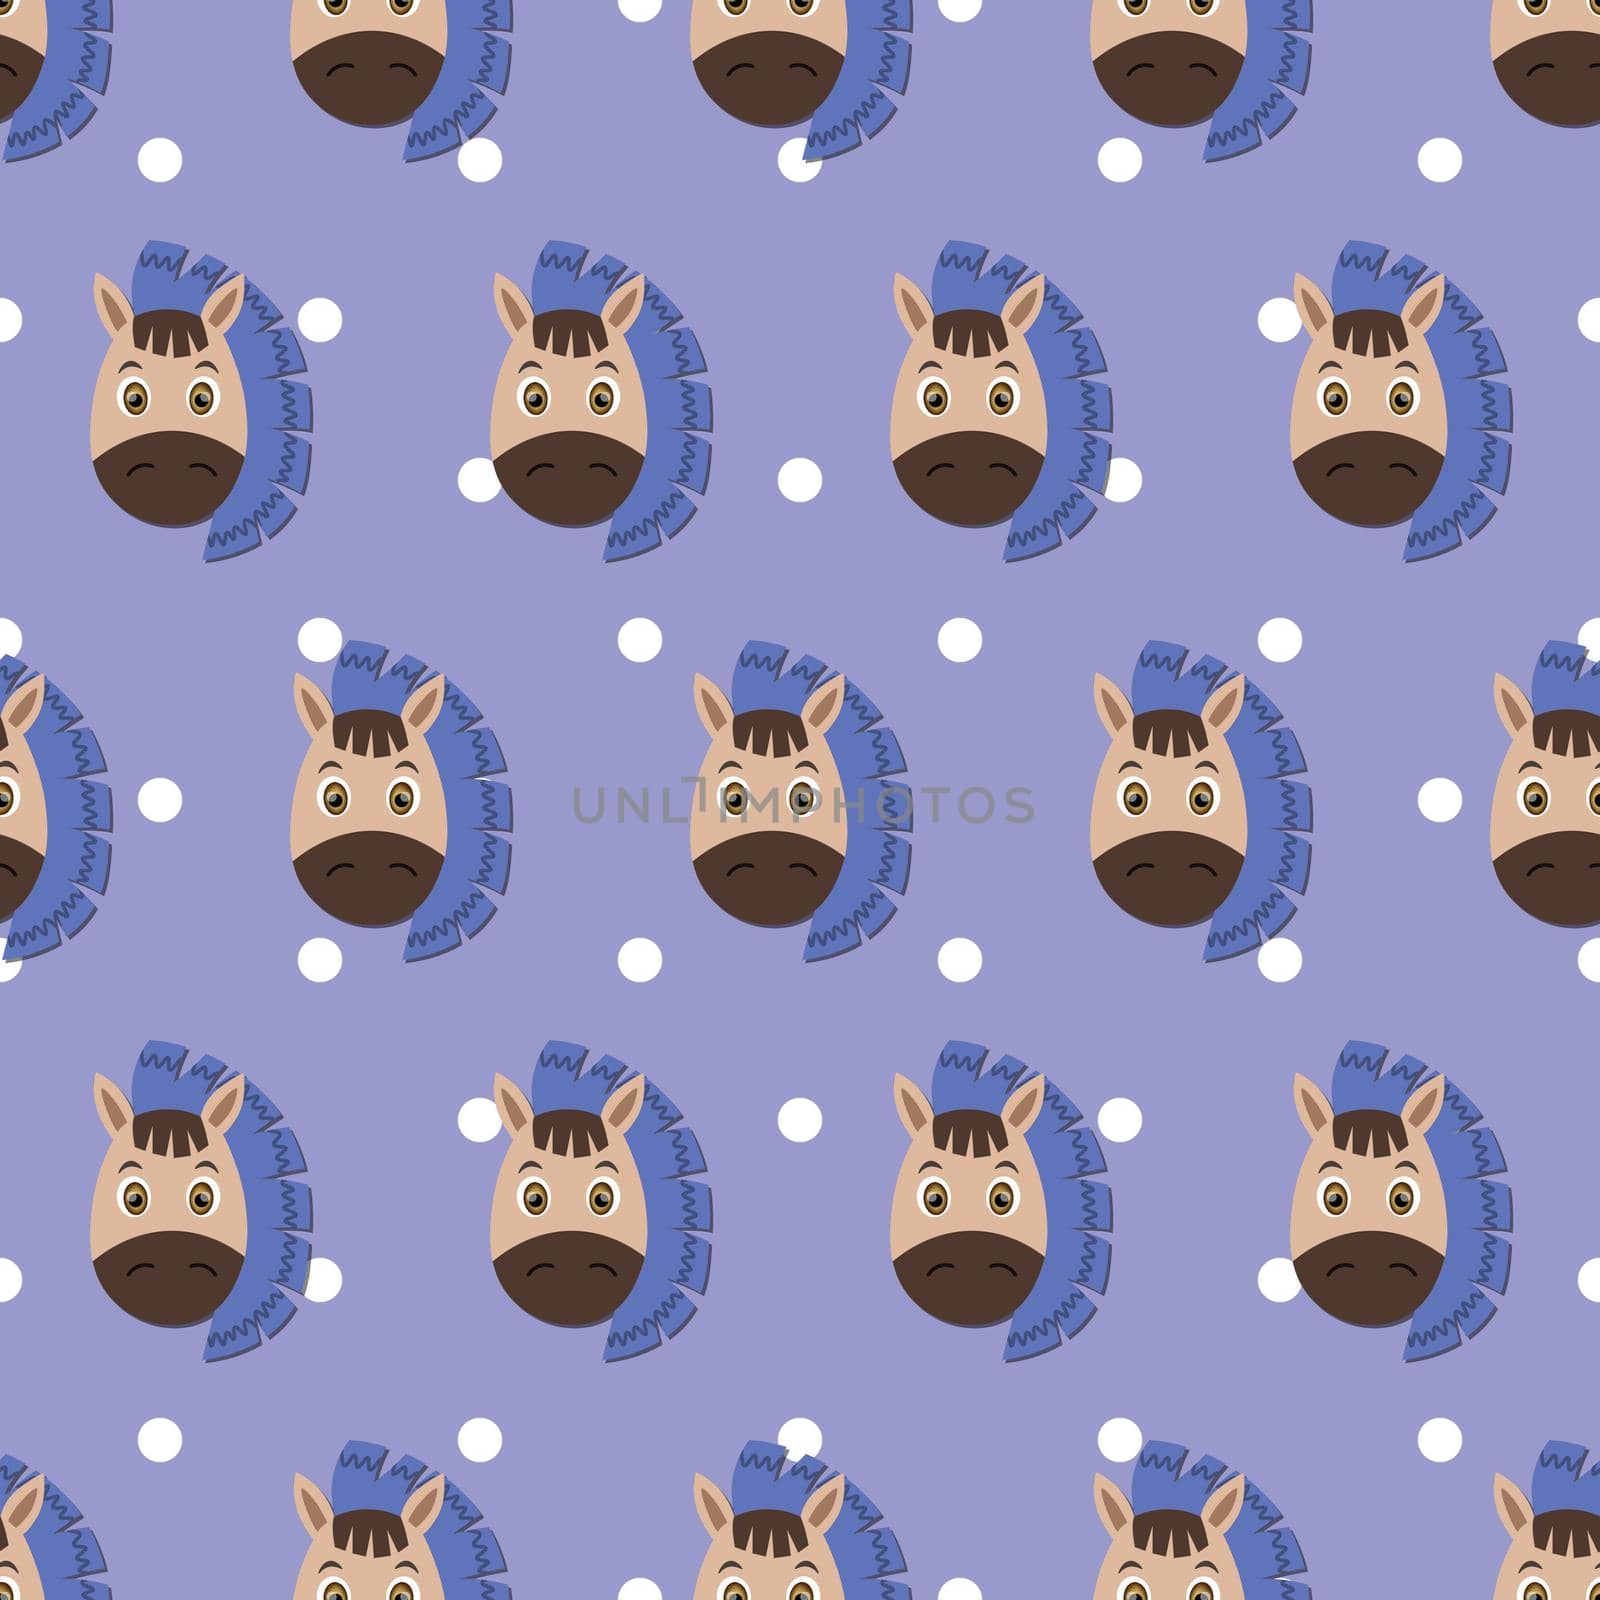 Vector flat animals colorful illustration for kids. Seamless pattern with cute horse face on purple polka dots background. Adorable cartoon character. Design for textures, card, poster, fabric,textile